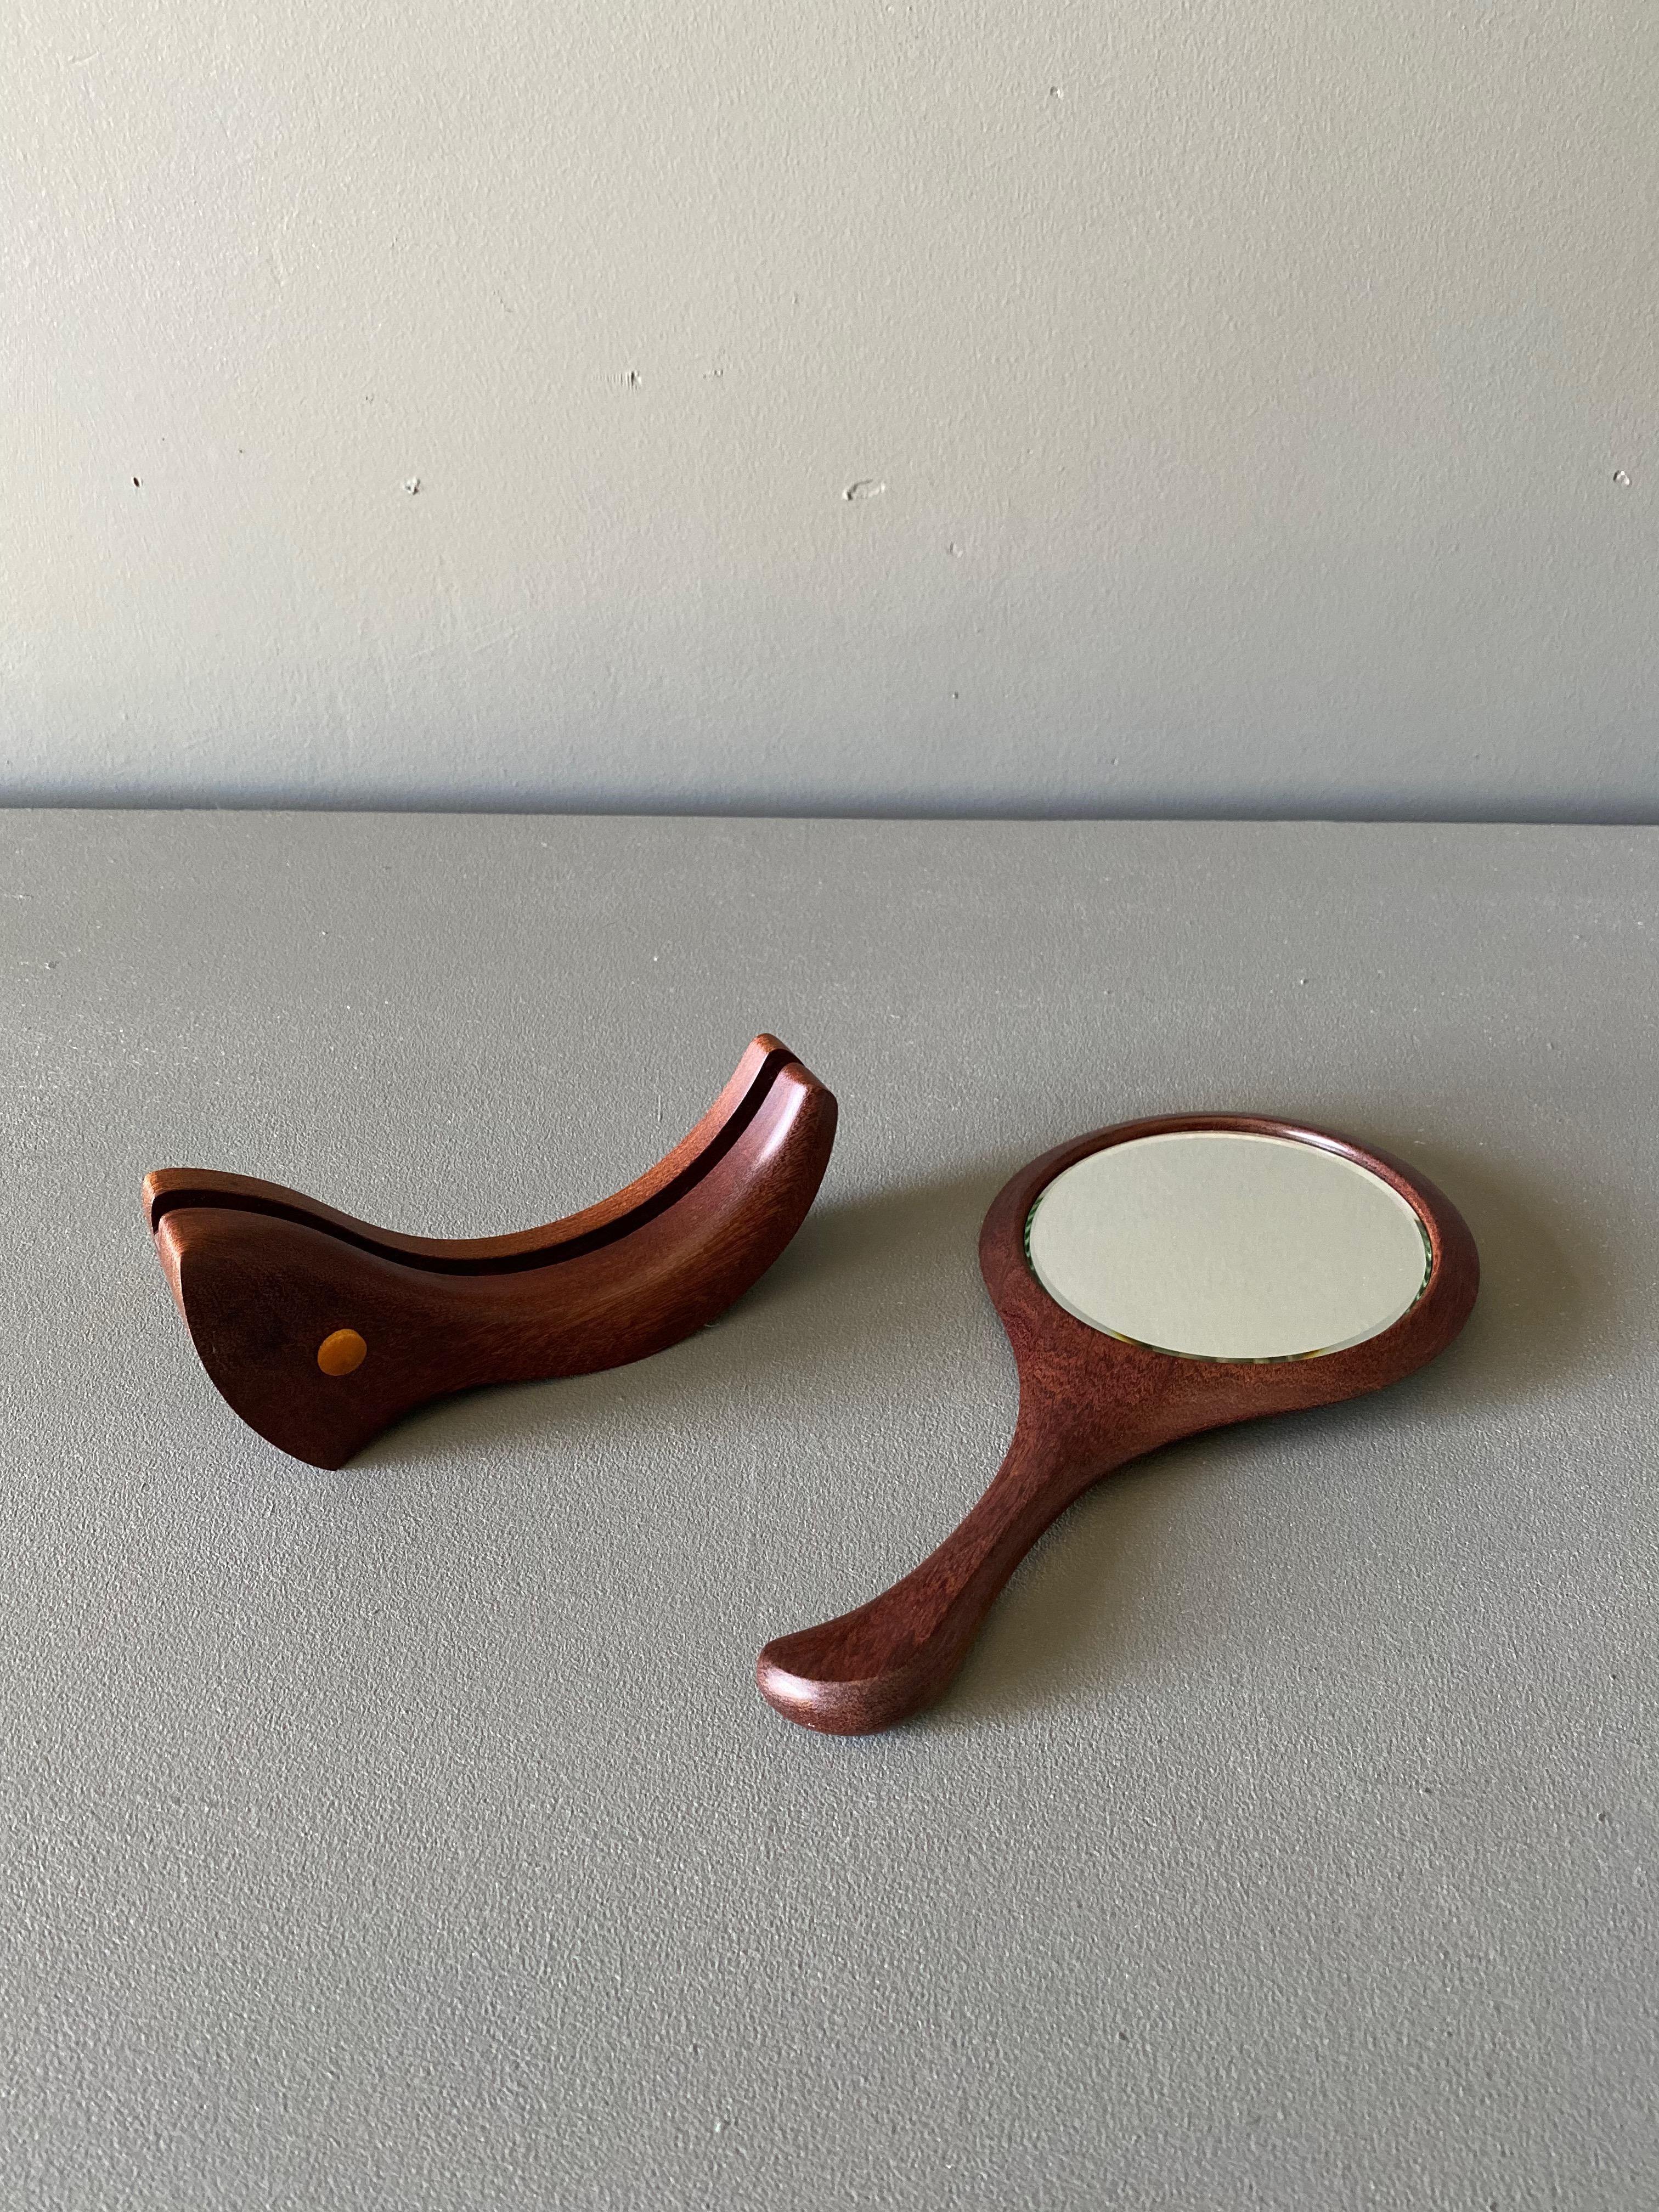 D. French Studio Crafted Hand Held Mirror w/ Stand 1996 For Sale 4